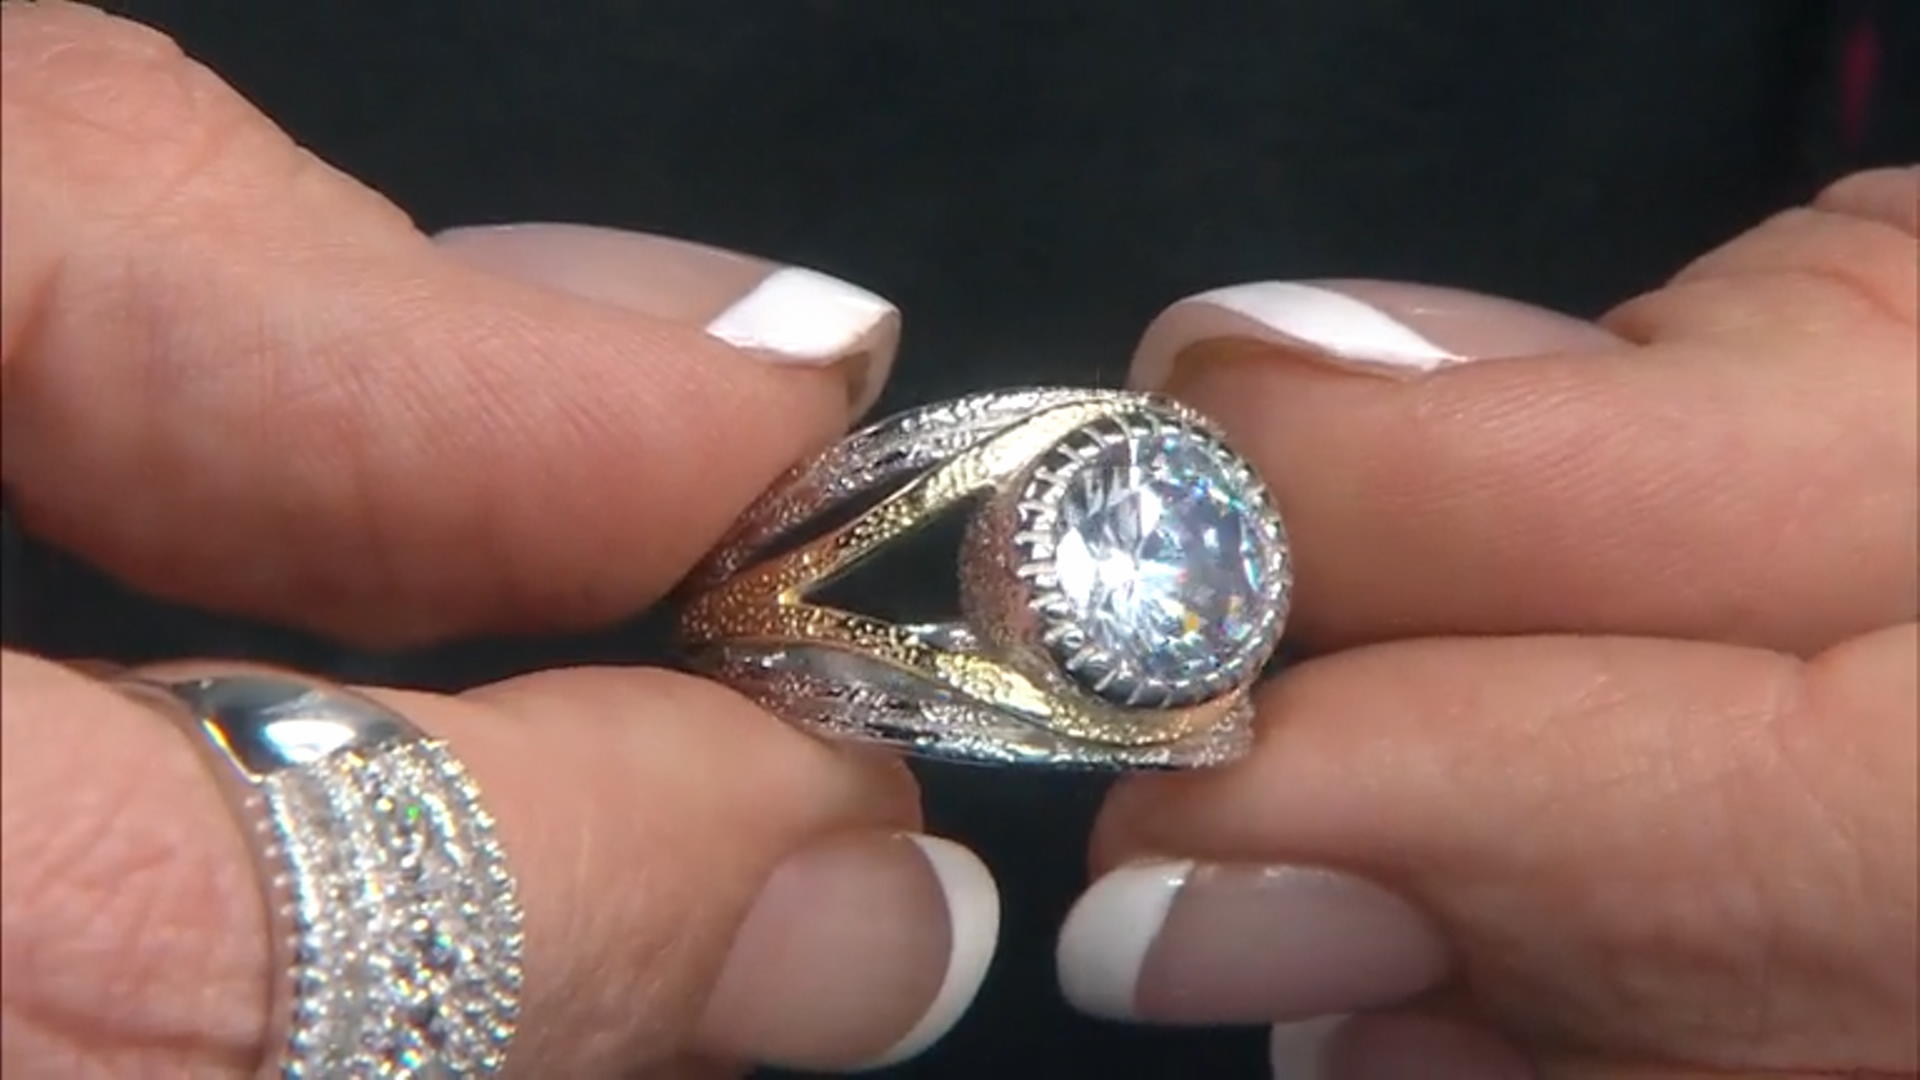 White Cubic Zirconia Rhodium And 14K Yellow Gold Over Sterling Silver Ring 5.94ctw Video Thumbnail